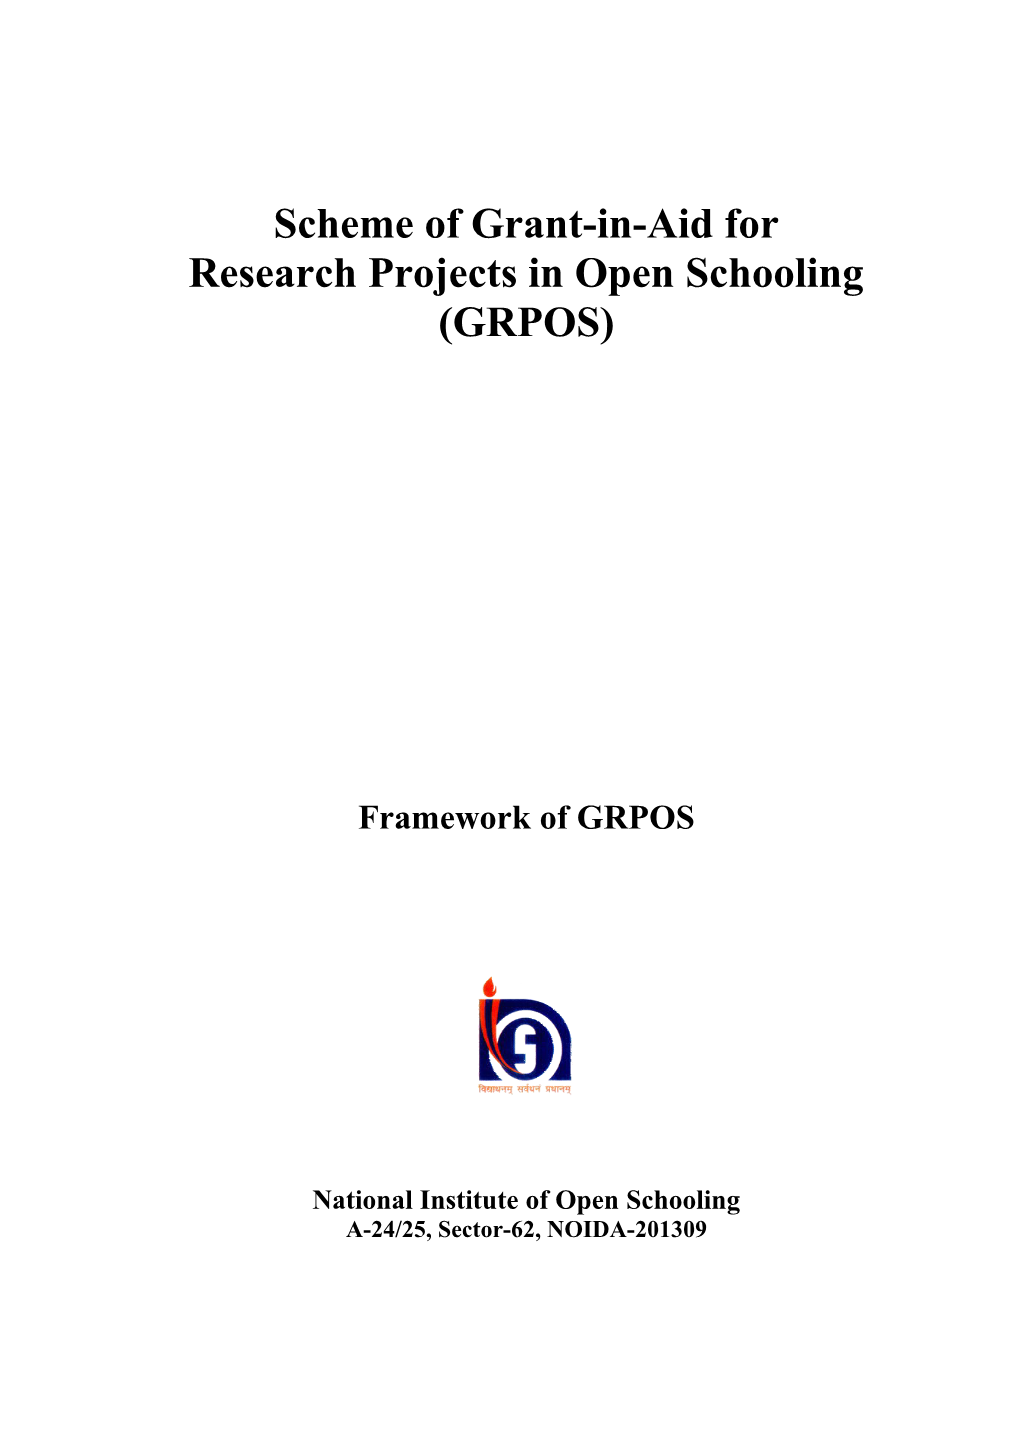 Scheme of Grant-In-Aid for Research Projects in Open Schooling (GRPOS)